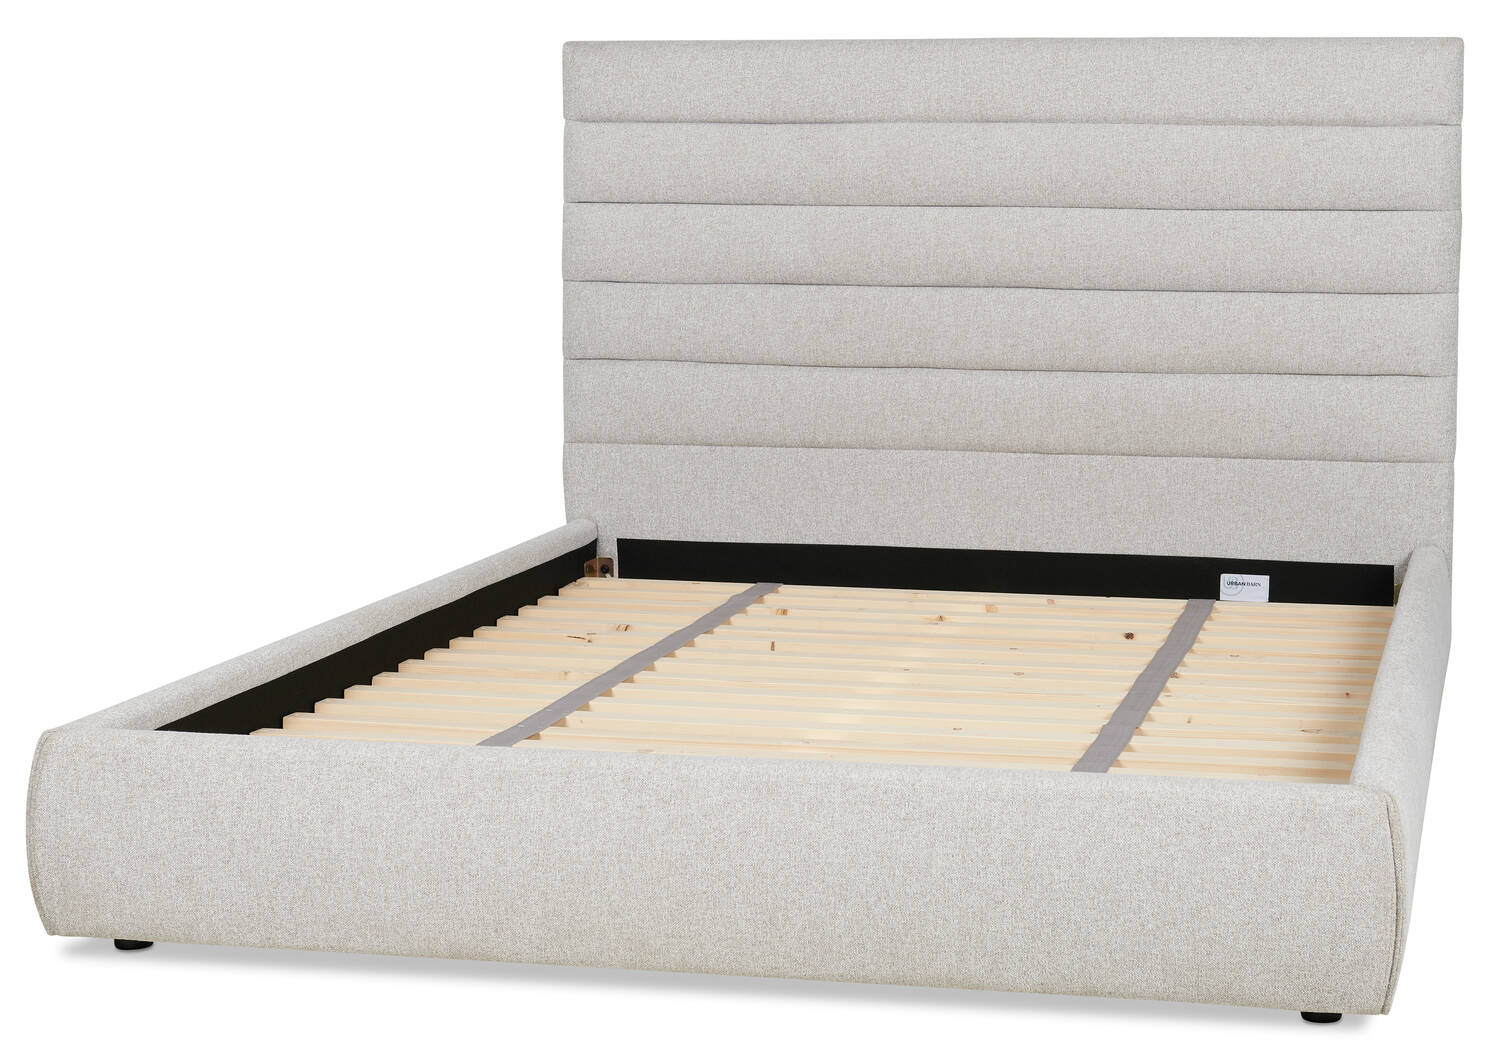 Impero Bed -Tali Wheat, QUEEN